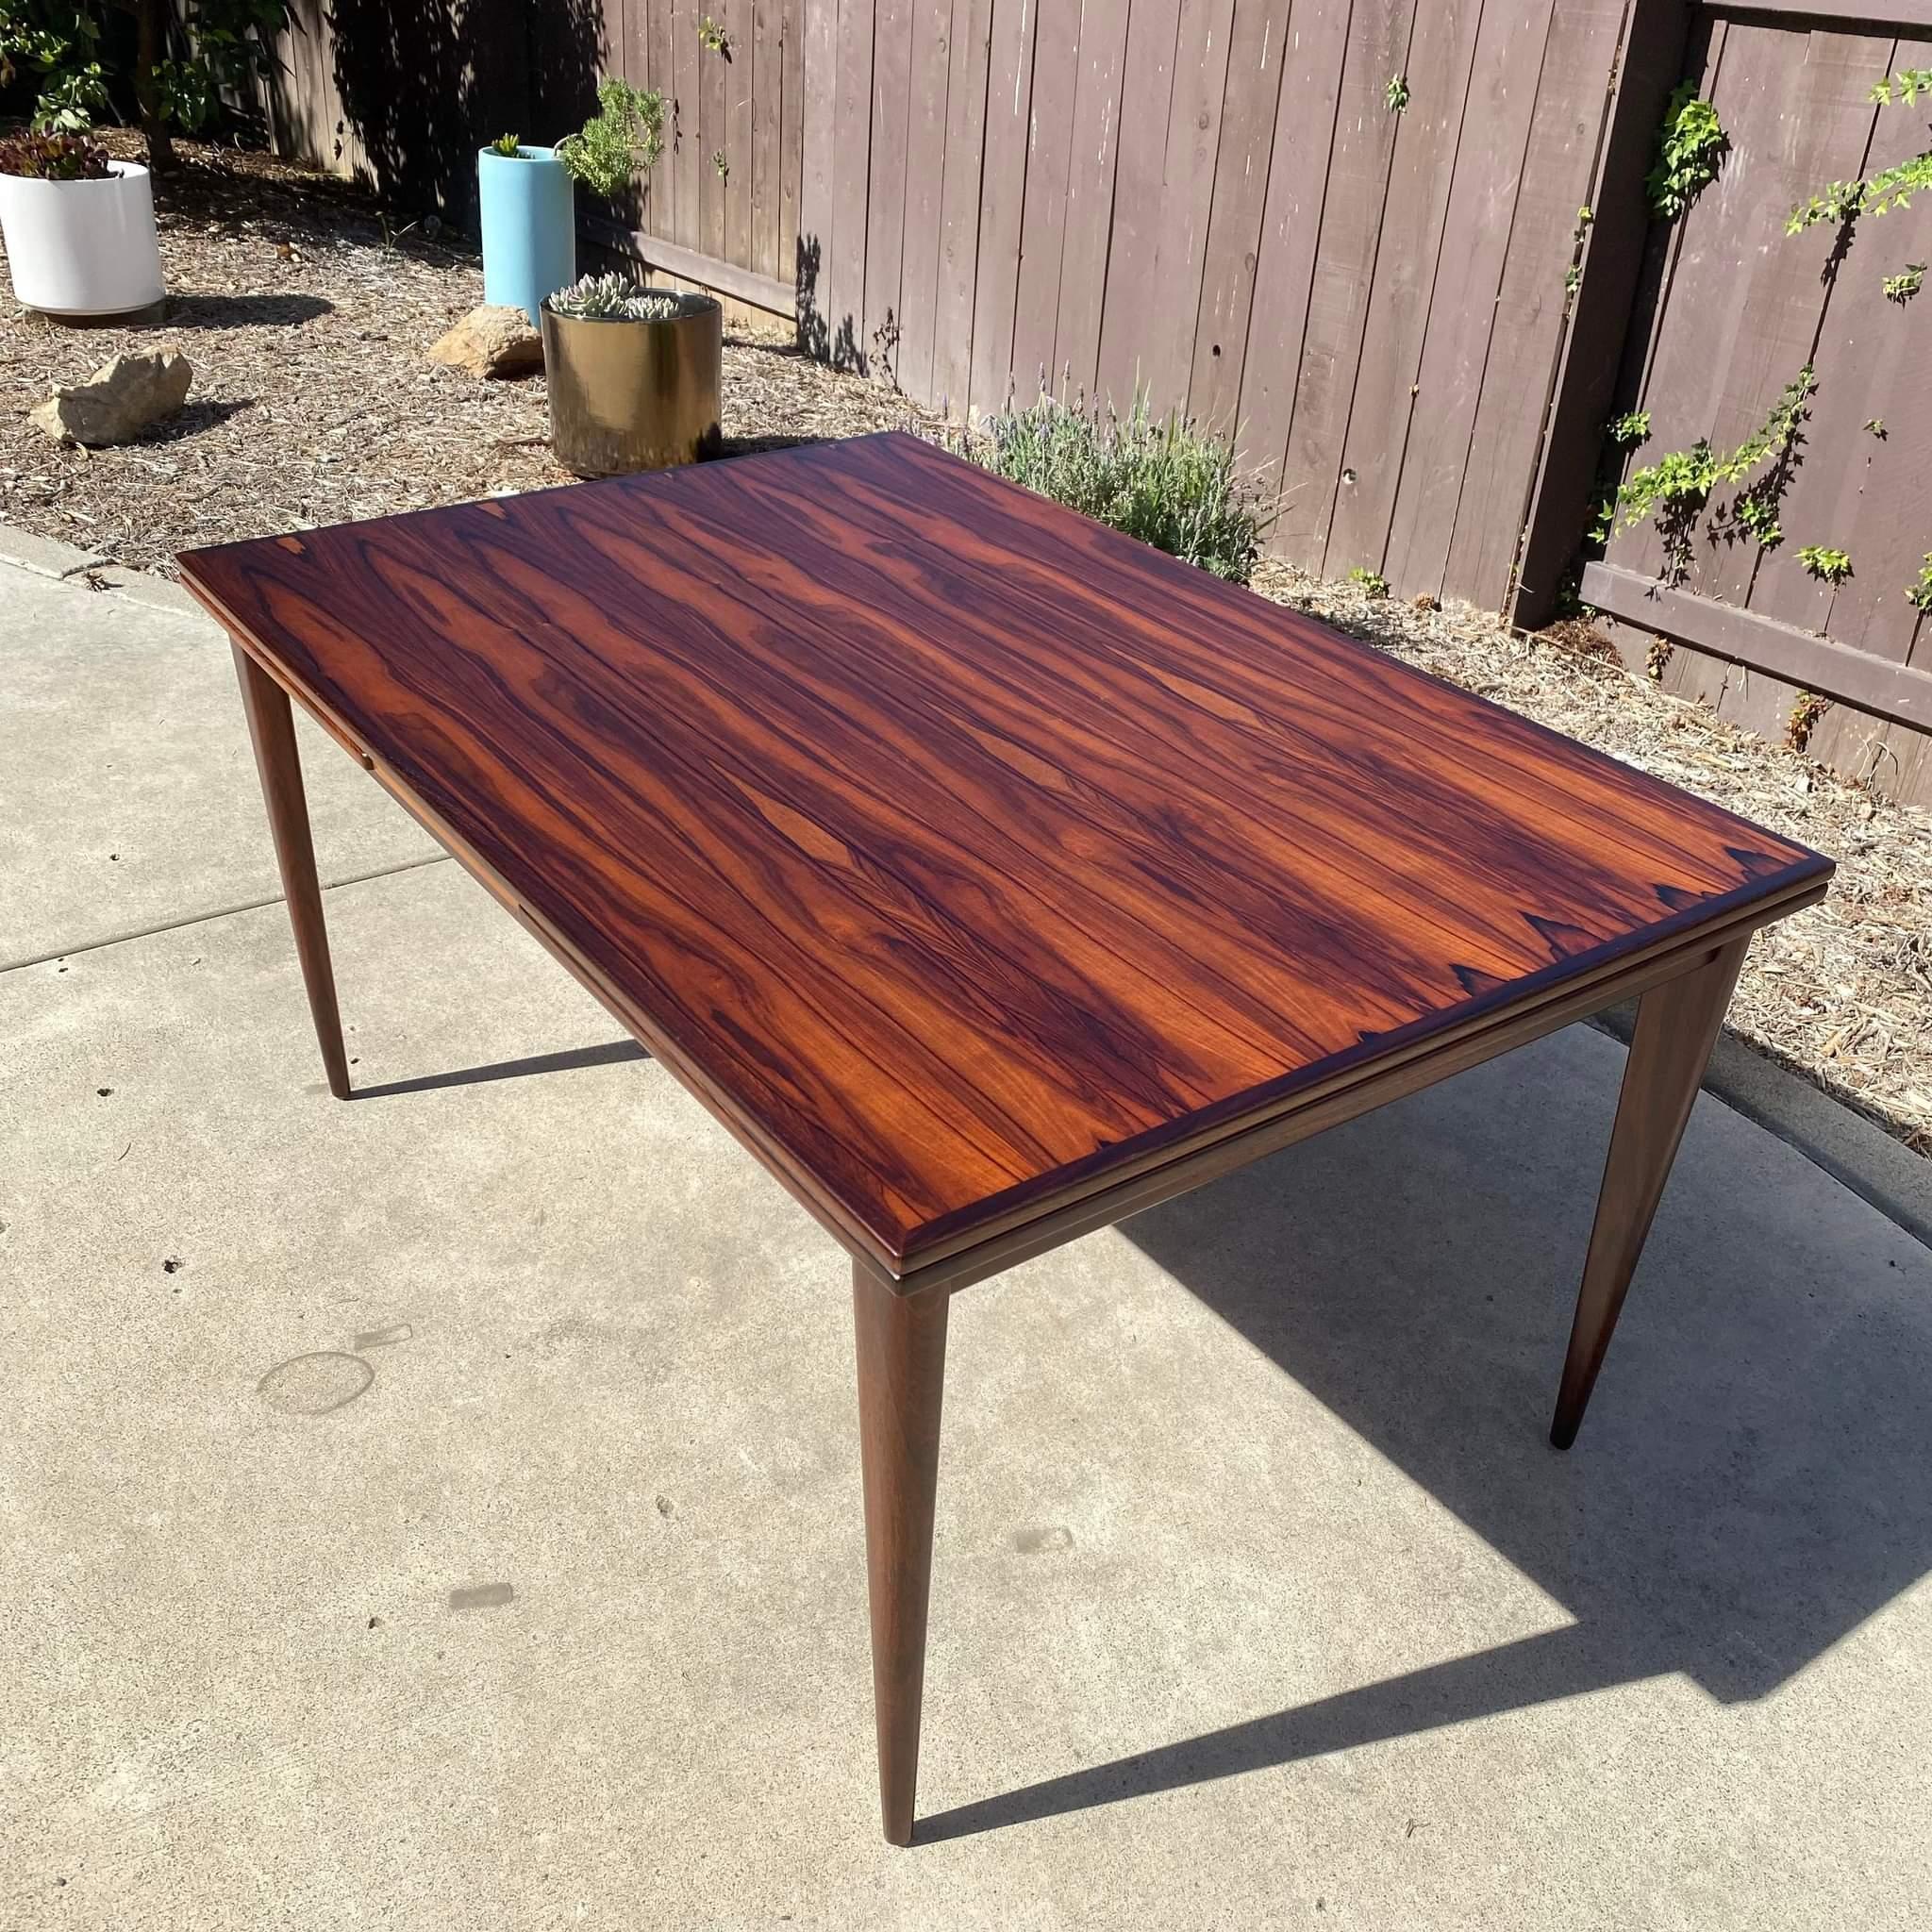 Pictures do not do justice on this beauty! Now available is an amazing rosewood dining table by Niels Møller for J.L. Møllers Møbelfabrik c1960s. Features a gorgeous bookmatched grain that been professionally refinished. Measures approximately 59L x